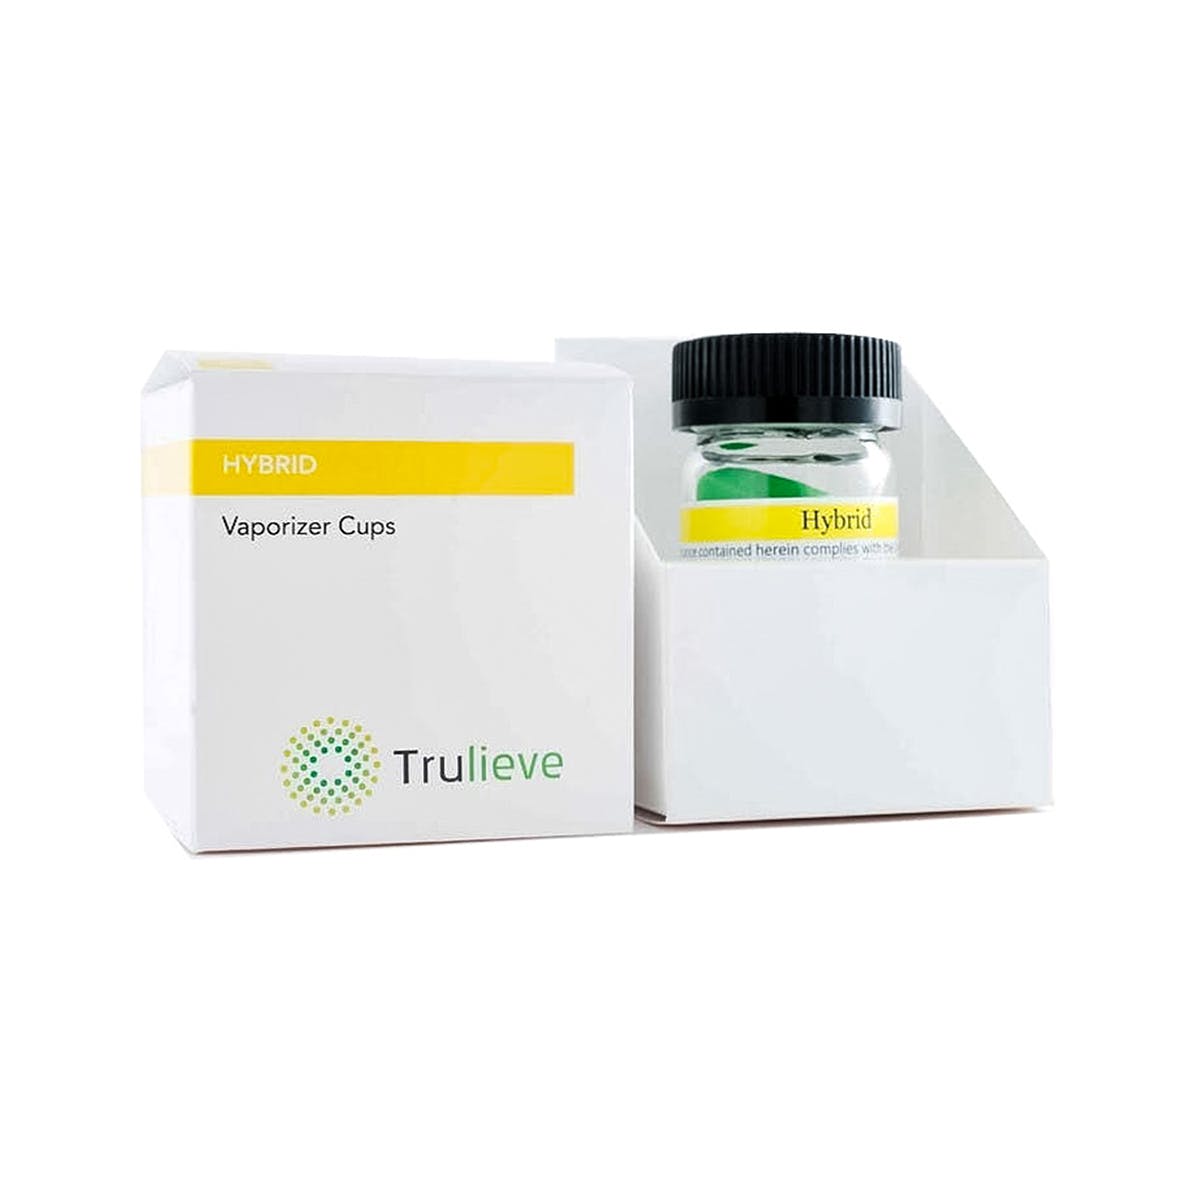 marijuana-dispensaries-trulieve-in-the-villages-vaporizer-cup-4-pack-hybrid-gsc